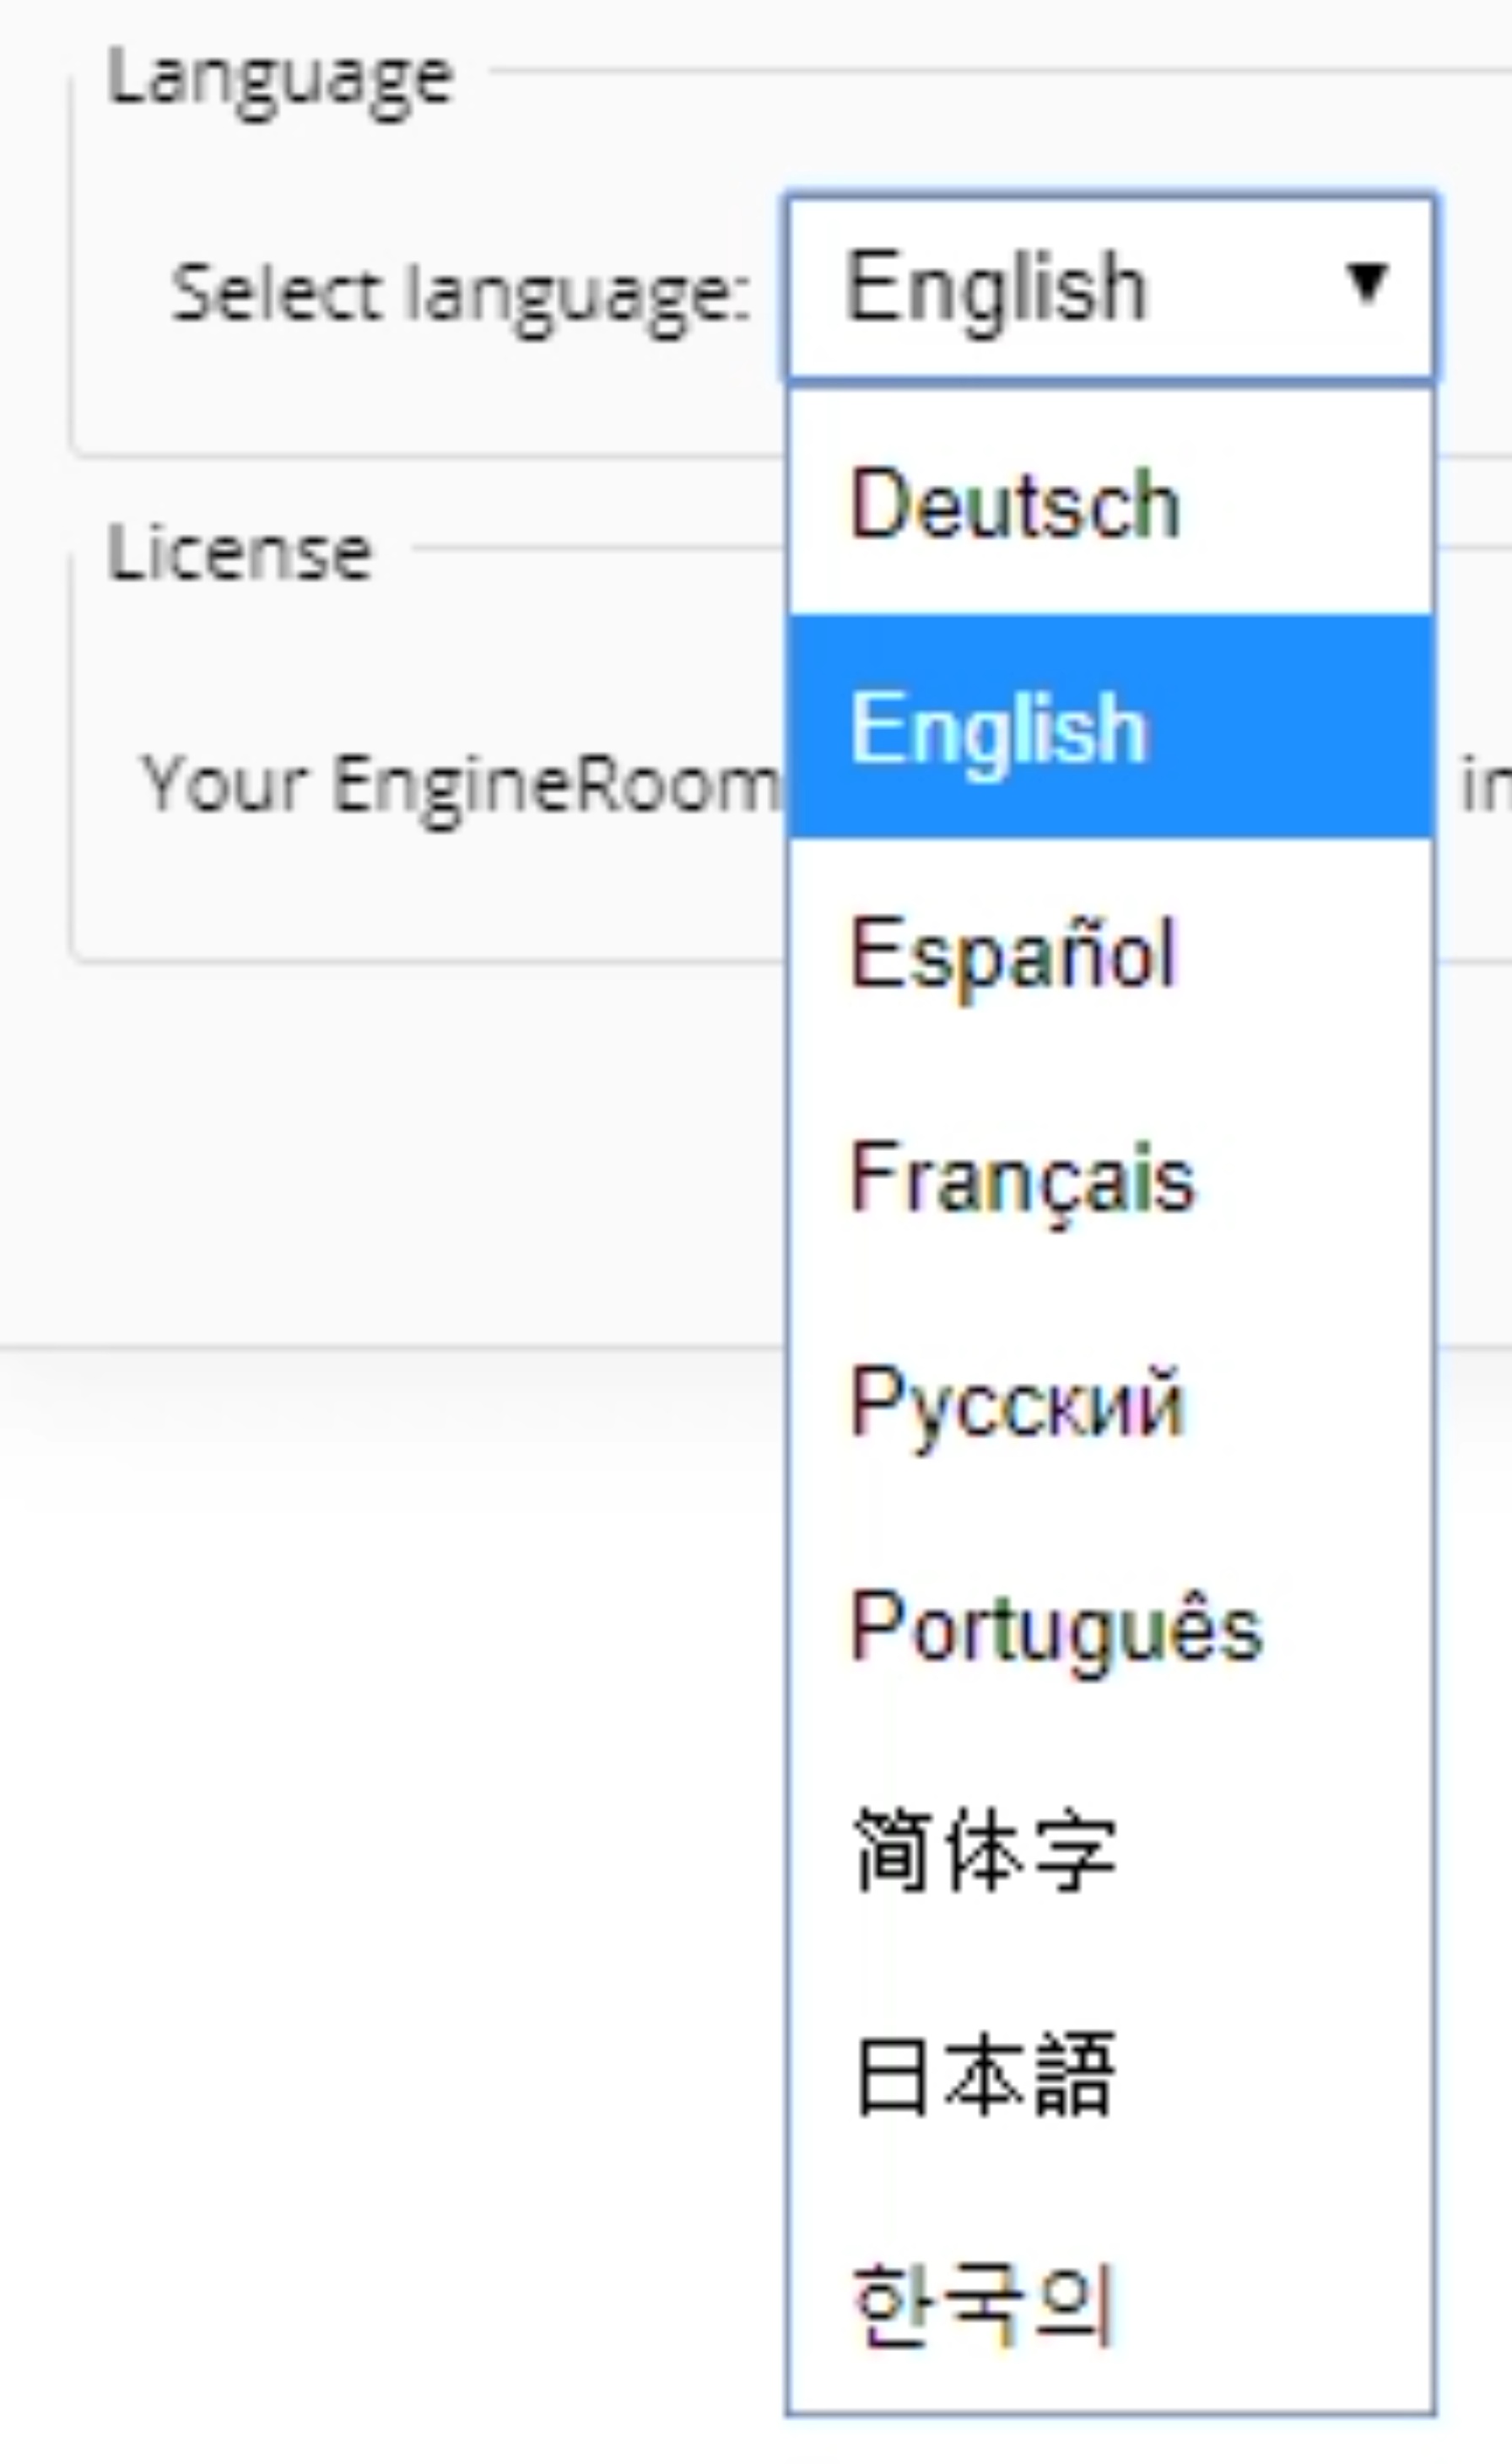 Choose language from dropdown.